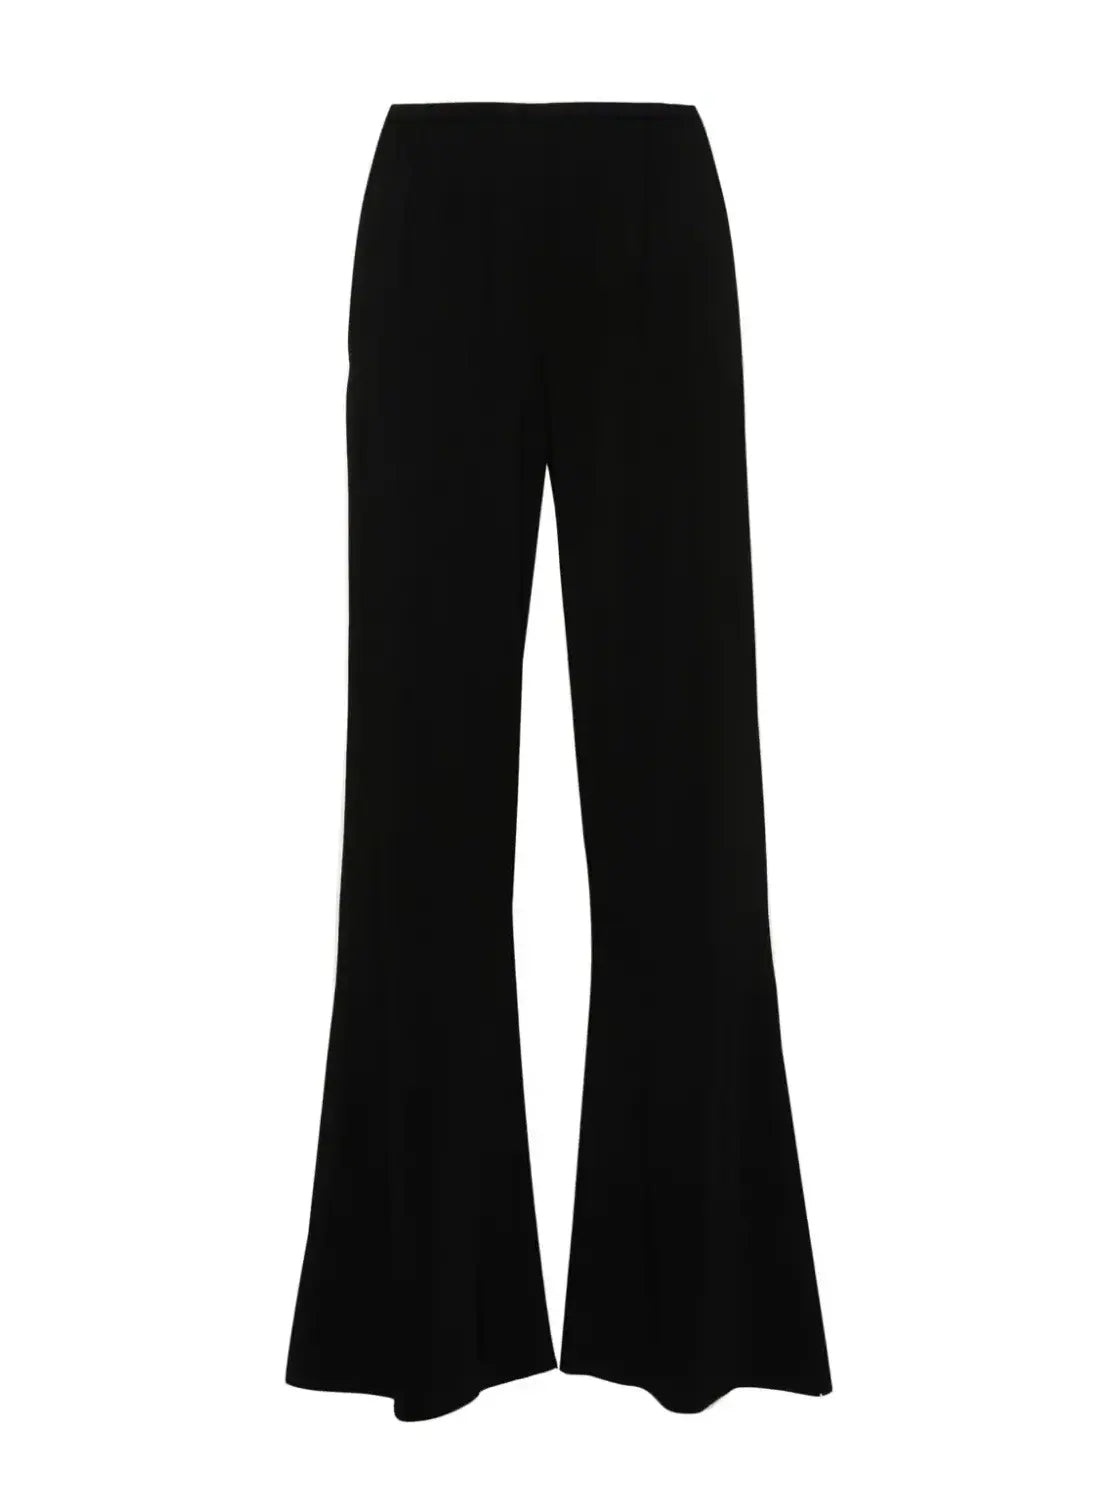 Buy Cotton Flare Pants for Women Online from Blissclub